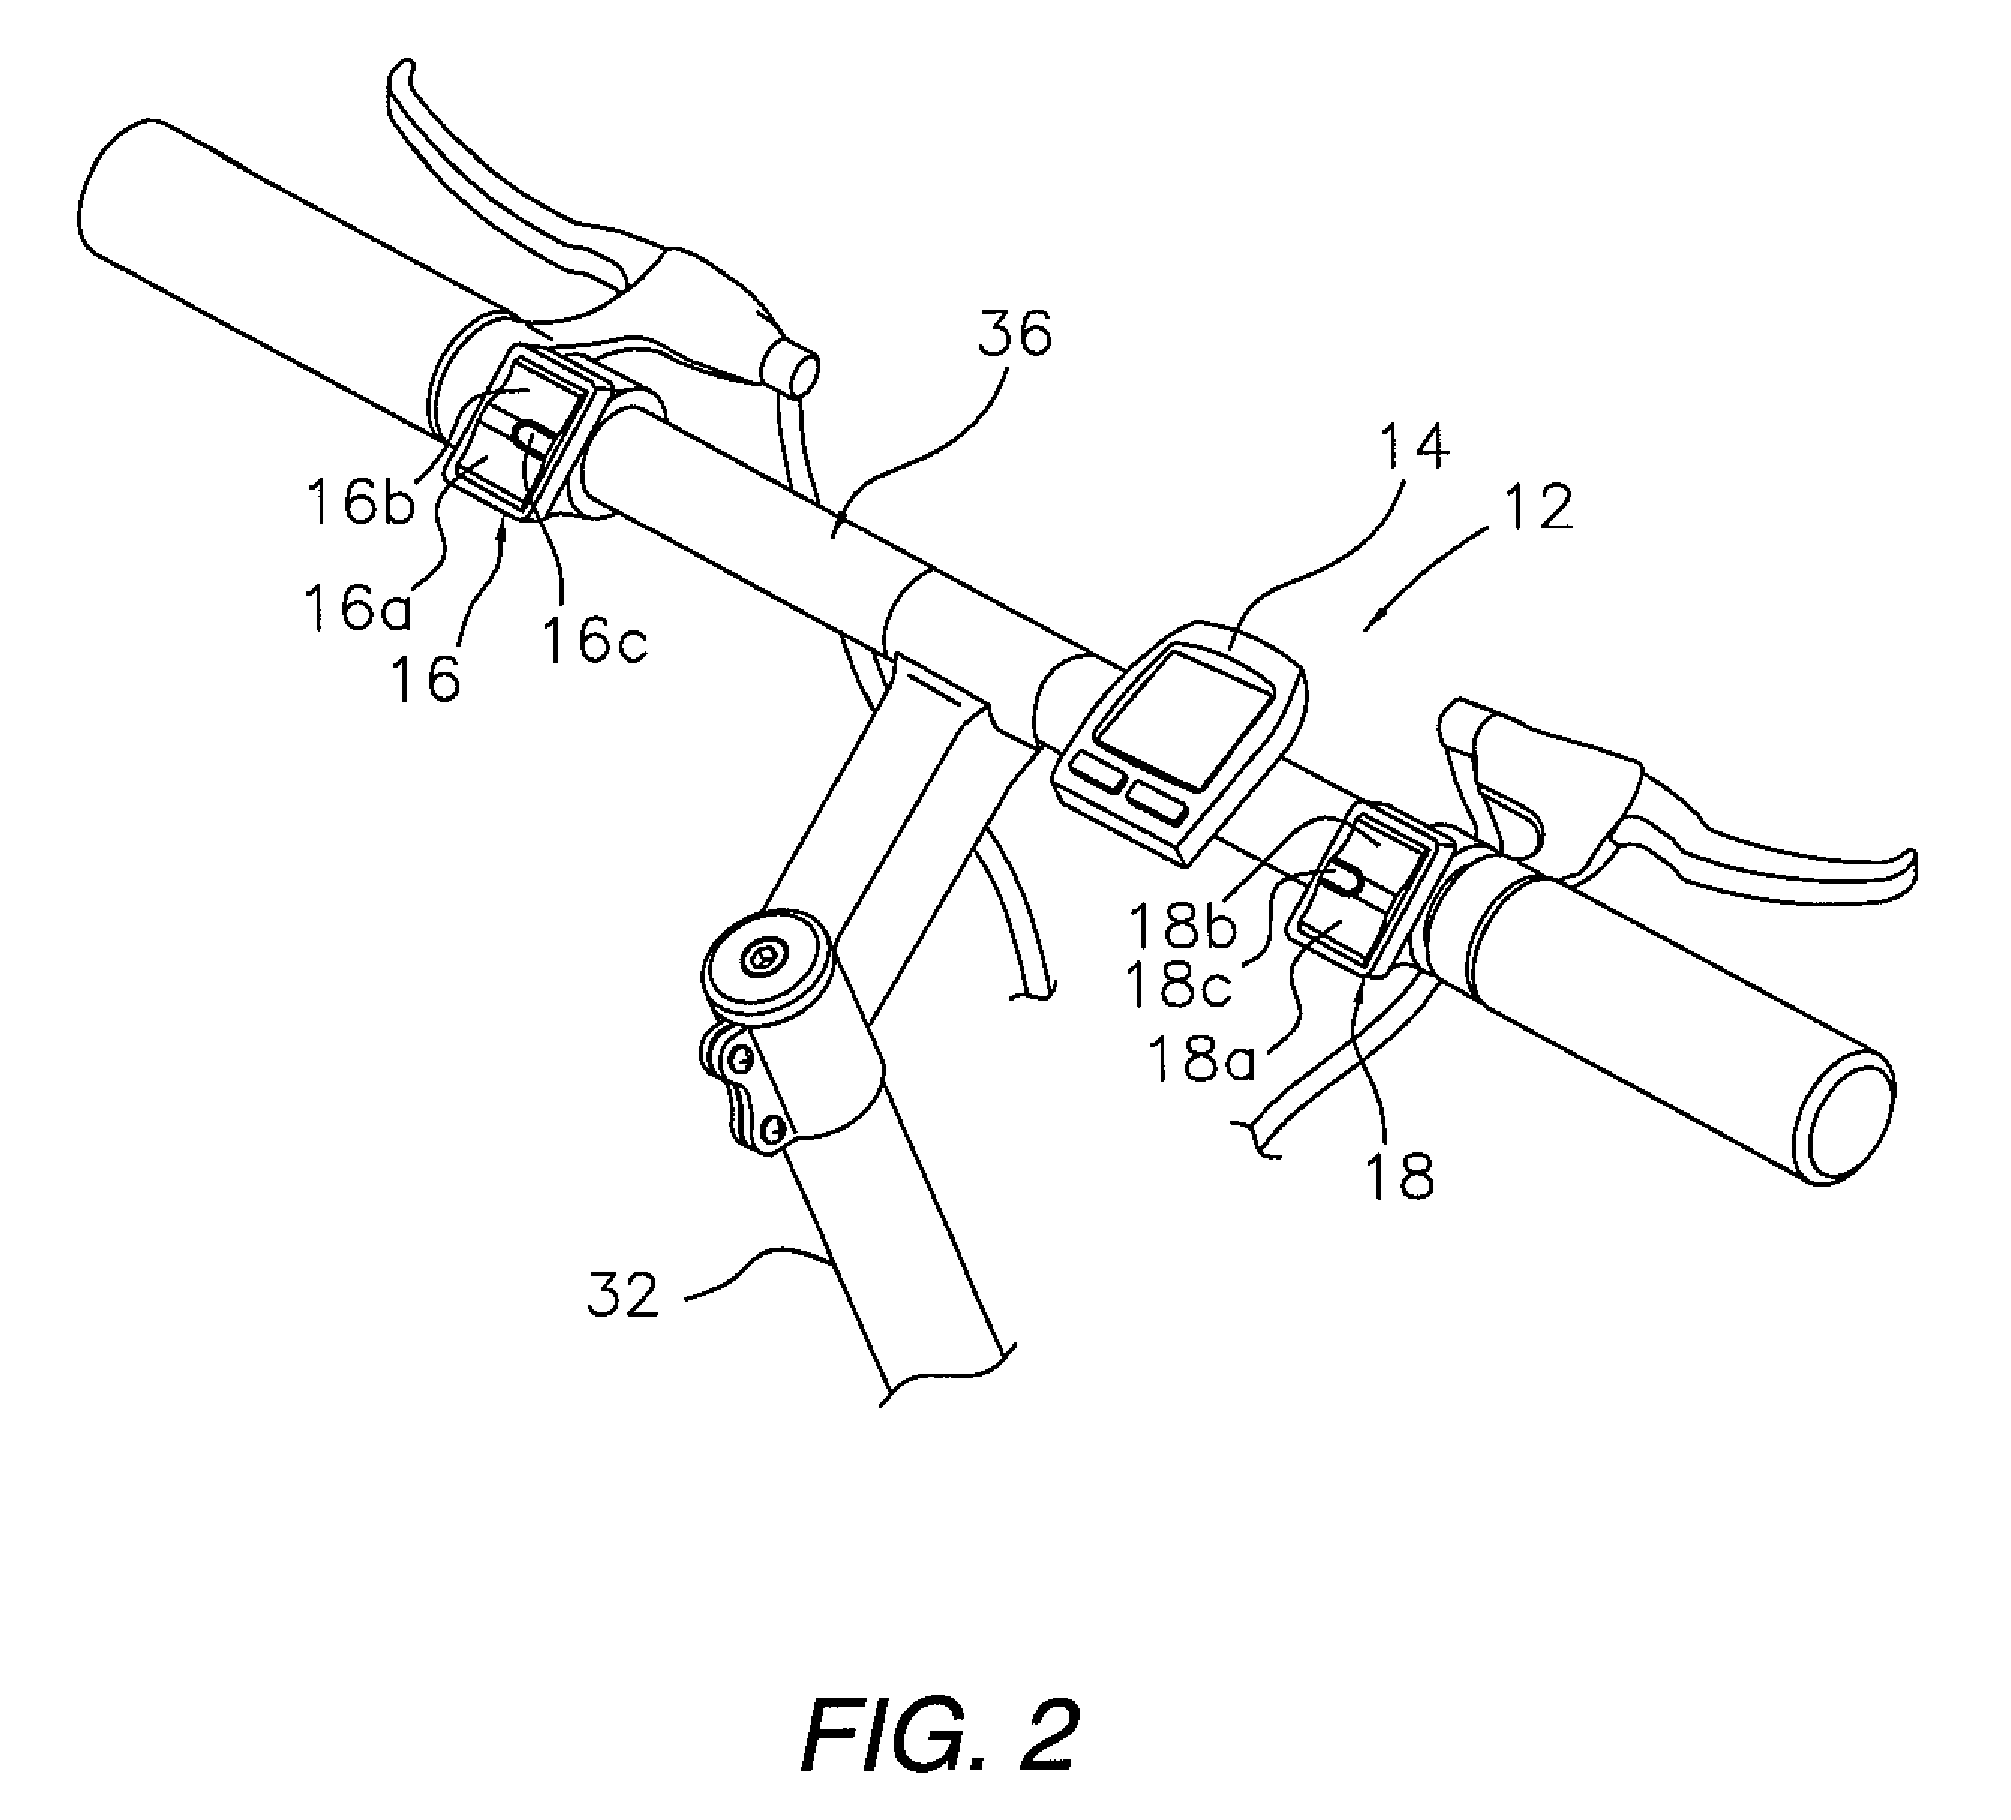 Bicycle control system